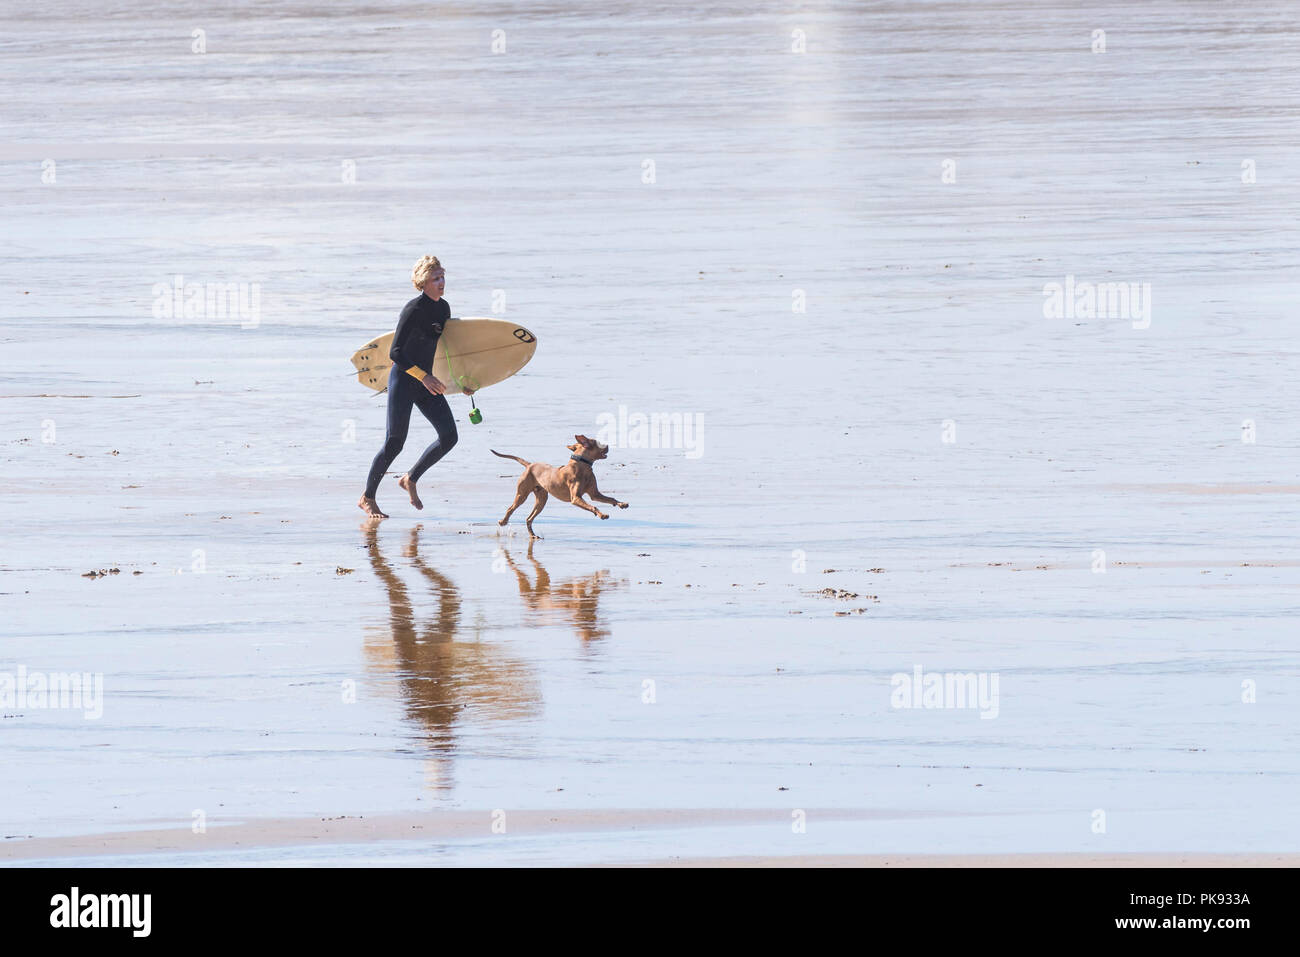 A dog running alongside a surfer on Fistral Beach in Newquay Cornwall. Stock Photo